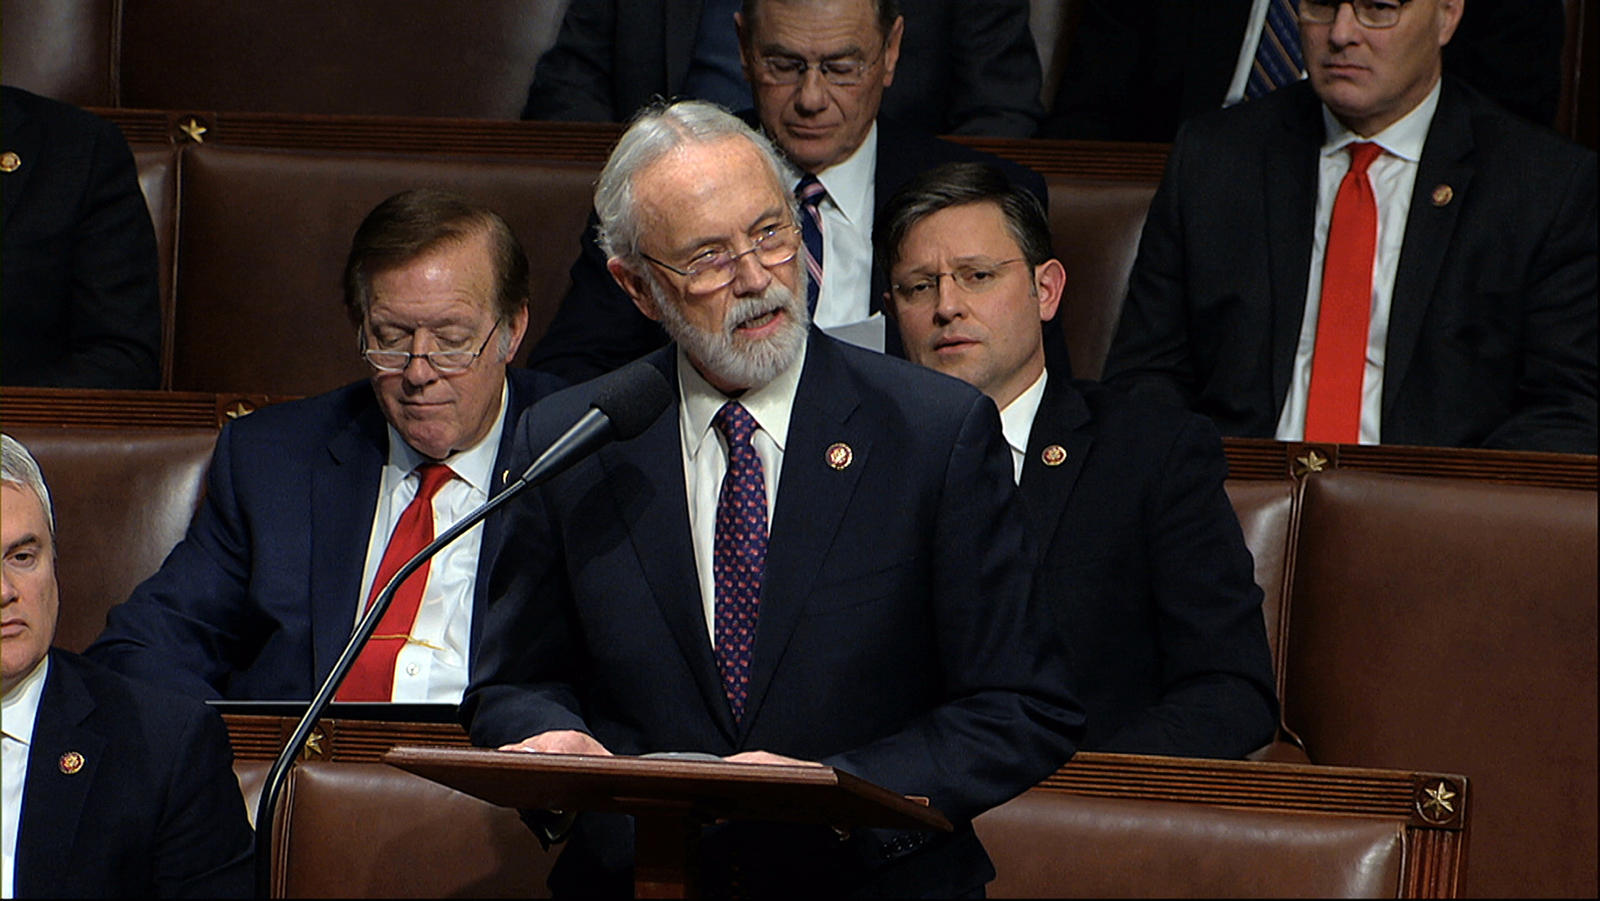 Rep. Dan Newhouse, R-Wash., speaks as the House of Representatives debates the articles of impeachment against President Donald Trump at the Capitol in Washington, Wednesday, Dec. 18, 2019. CREDIT: House TV-AP